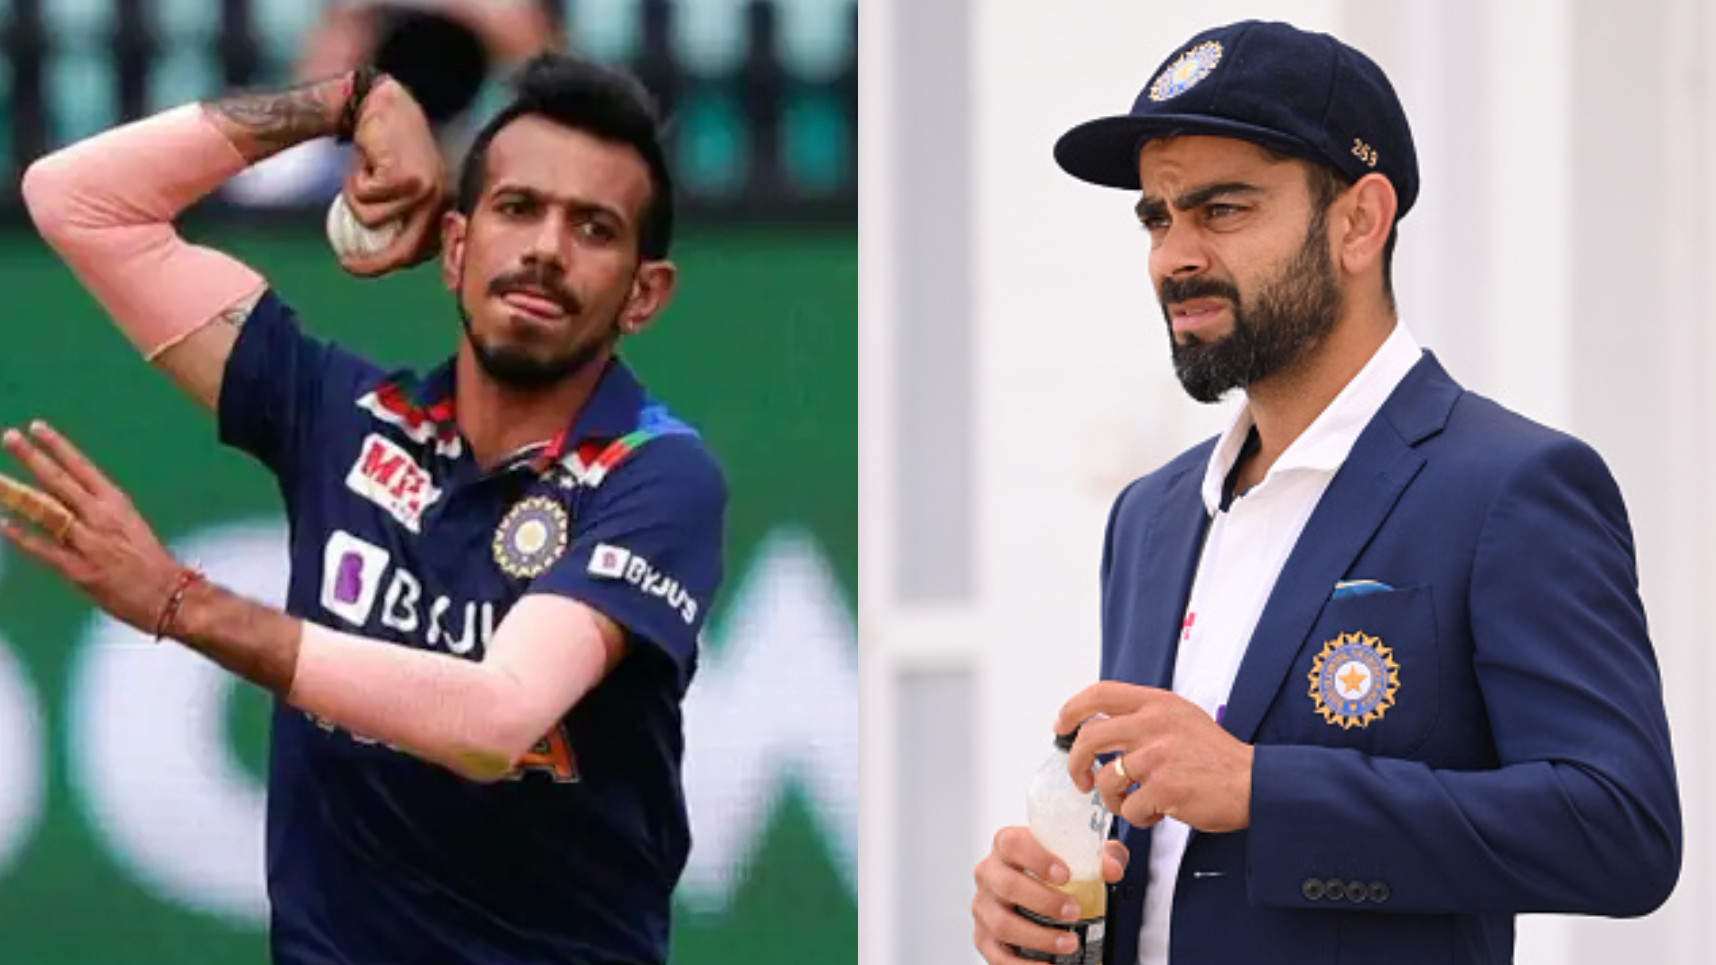 ENG v IND 2021: Virat Kohli will lead the team to series win in England, says Yuzvendra Chahal